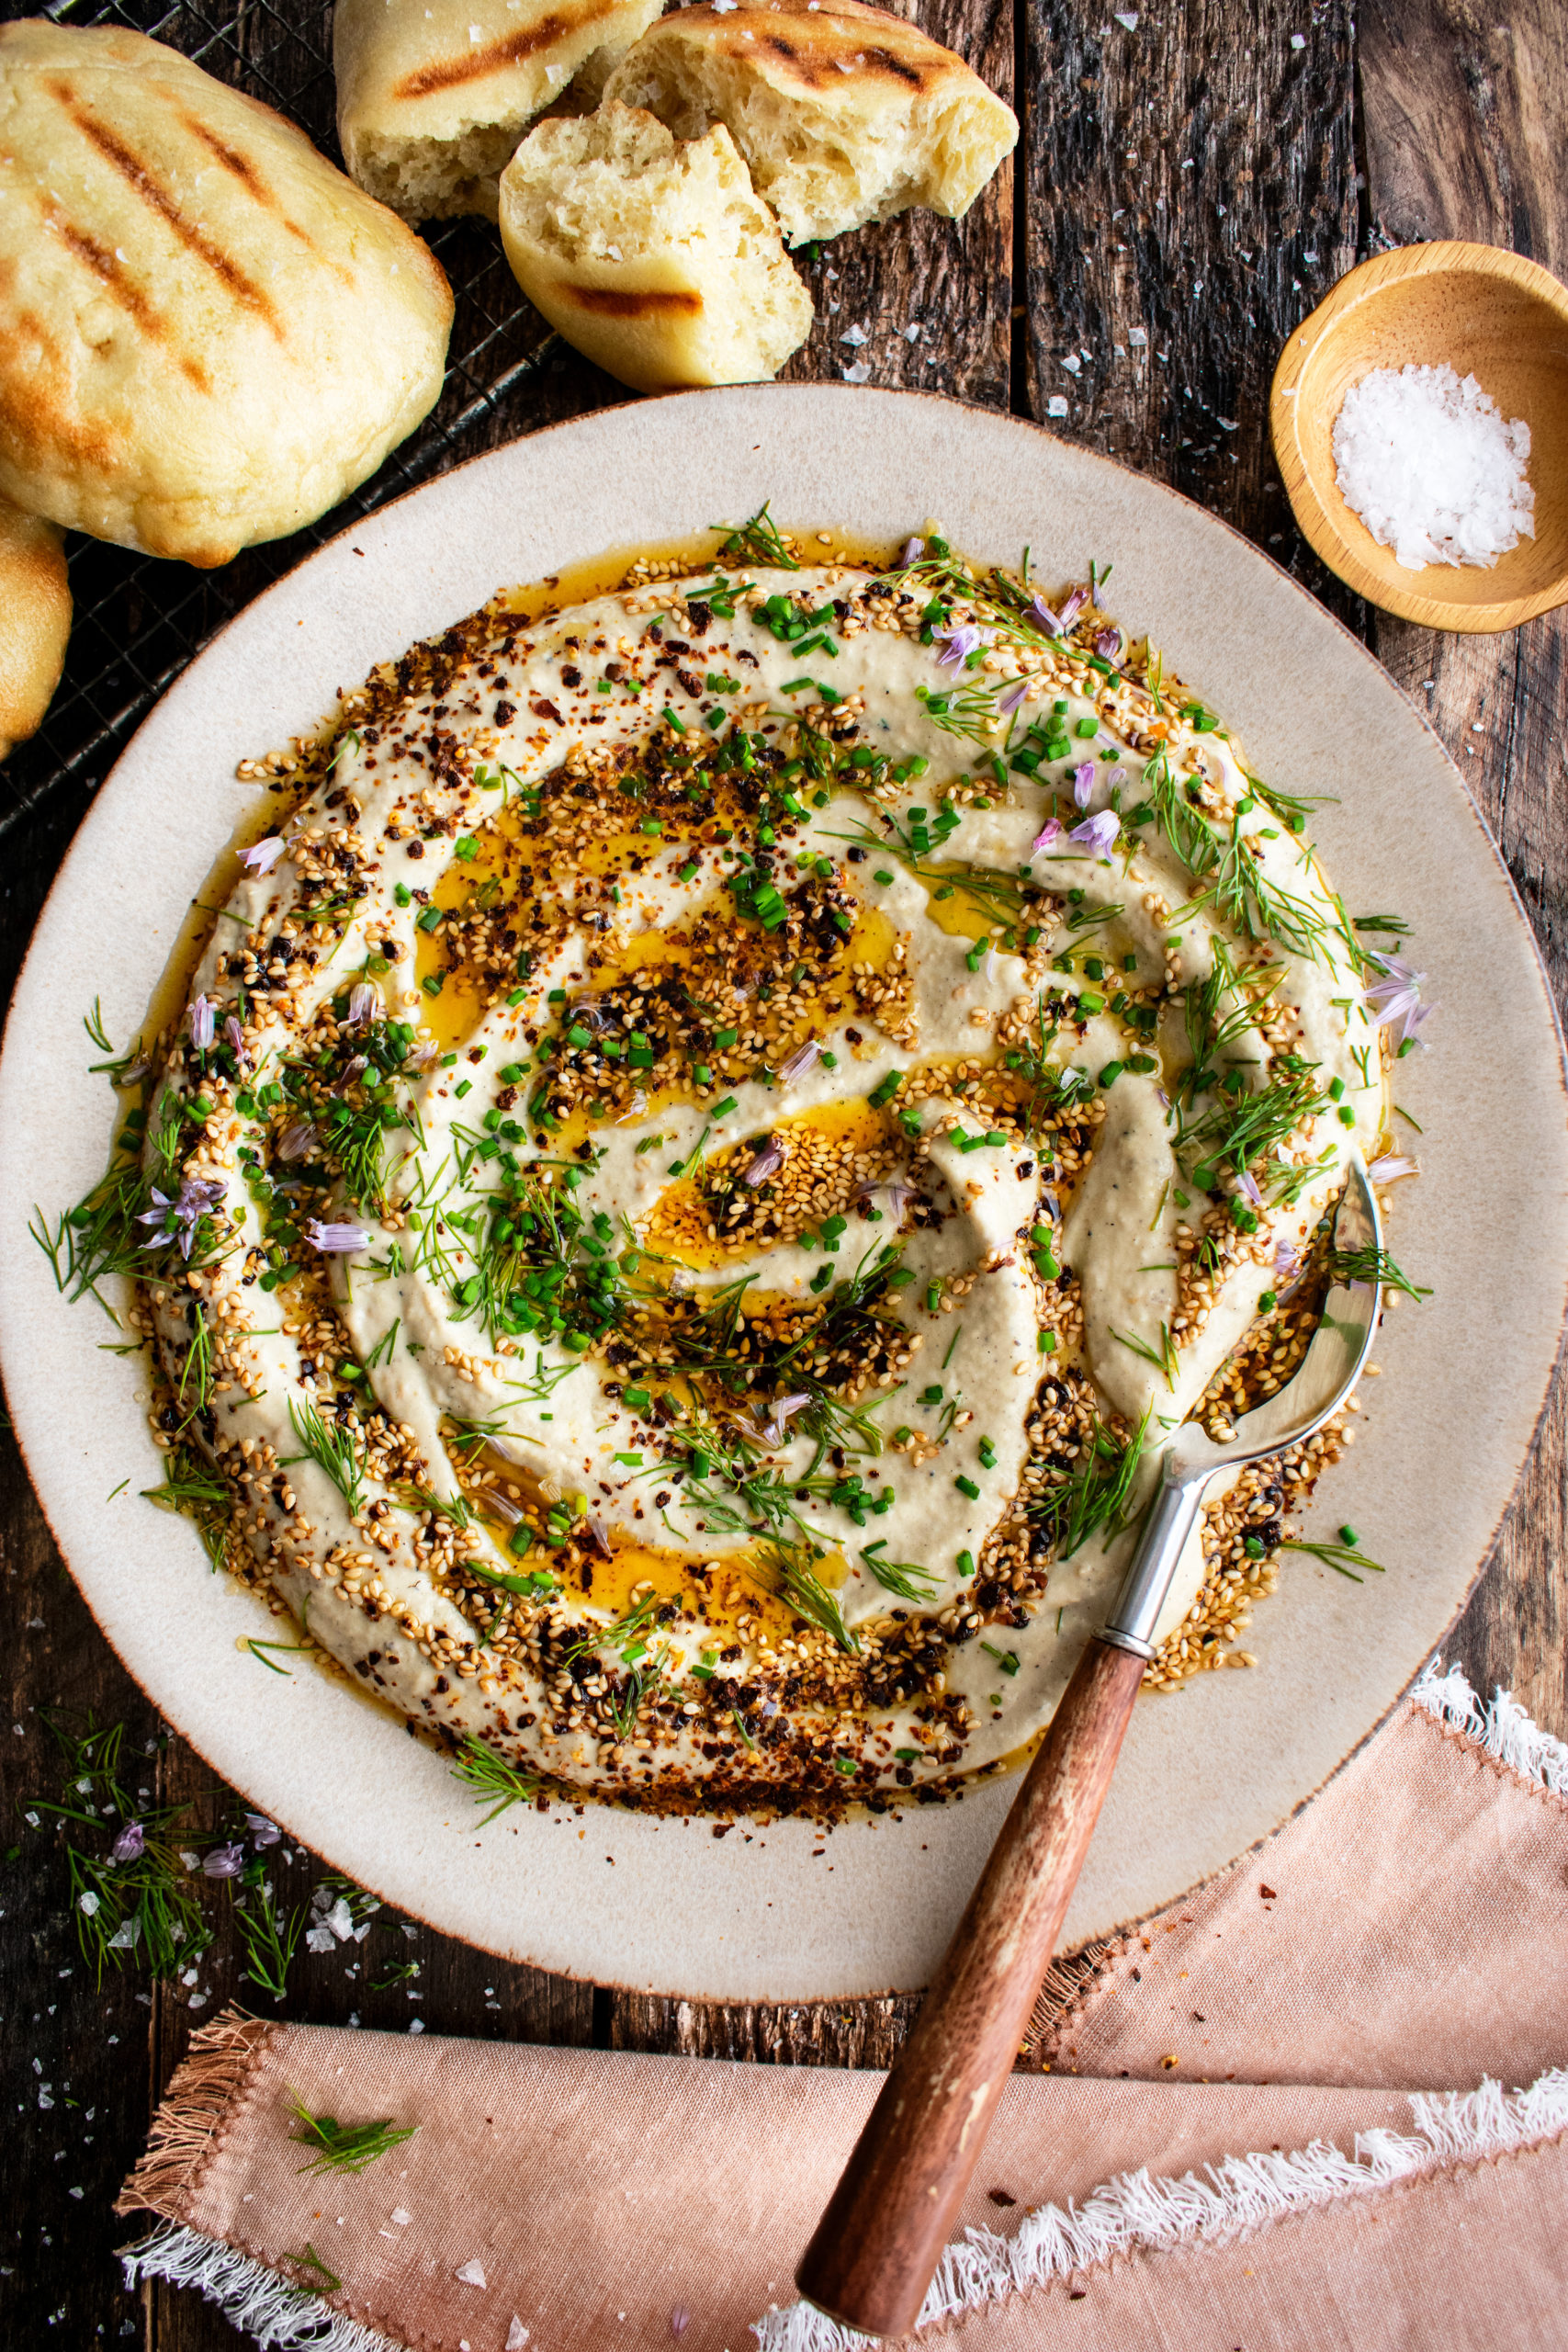 Charred Eggplant Dip with Toasted Sesame Chili Oil - The Original Dish